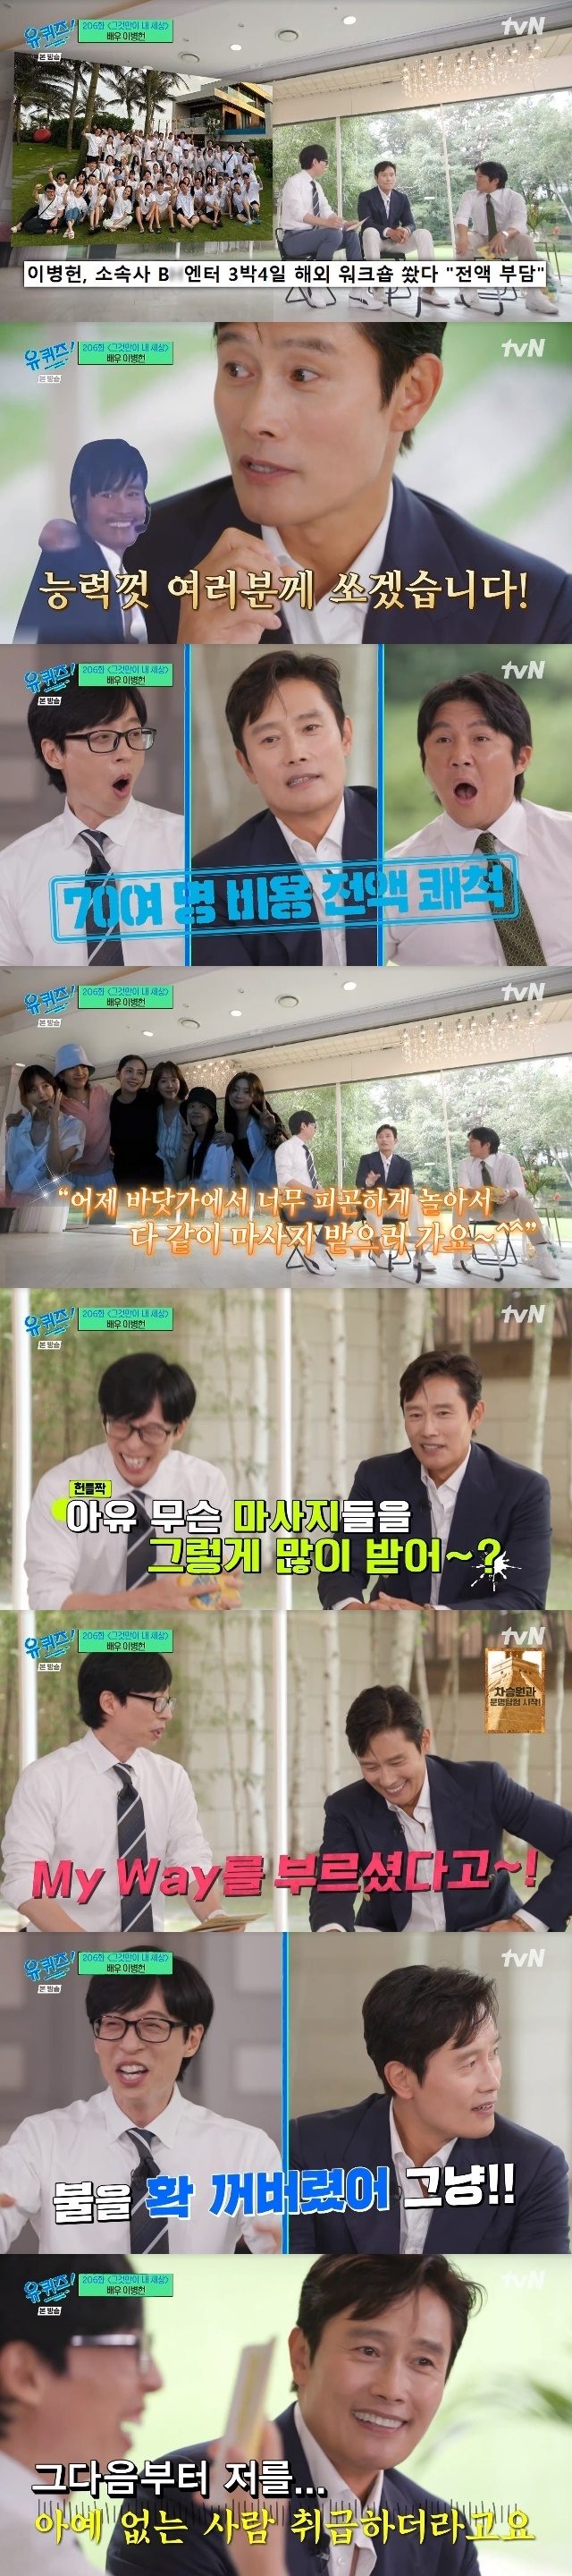 Actor Lee Byung-hun revealed an anecdote that he was treated as a person who was not in the workshop he shot.Actor Lee Byung-hun appeared as a guest in the 206th episode of Only Thats My World, a tvN entertainment show You Quiz on the Block (hereinafter referred to as You Quiz on the Block) aired on August 9.On this day, Yoo Jae-Suk mentioned Lee Byung-huns agency, Workshop, which was reported as an article.At the time, Lee Byung-hun shot a three-night, four-day workshop abroad, and Lee Byung-hun confessed that there was a hidden behind-the-scenes story, saying, As a result, there is history before that.Lee Byung-hun said, Son Seok-woo and I started this company 17 years ago. We started small and dreamed a lot.Later, when our company has more actors and more employees, I hope we can go to workshops as a group and have a lot of unity competitions, he recalled. We talked about each one like a dream in the distant future.(CEO) said, Brother, I think we can really go to the workshop this time, so he said, Its a really good idea. Then there was Song Yeon-hee at the end of last year.Son Seok-woo, the representative of Son Seok-woo, said that he was going to make a surprise announcement. What kind of announcement? It says BH Overseas Workshop.I caught Mike, but I thought I had to say something there. I said, I will shoot you as much as I can. I have to keep that promise. Lee Byung-hun was responsible for more than 70 people.Lee Byung-hun, however, said, It was a really happy time, he said. I was proud and happy with the staff and actors who spent 17 years talking like a dream.Yoo Jae-Suk said, I was happy and proud, but the security seems to be in the middle.For example, Lee Byung-hun said, Here, give me five more bottles of beverages. Lee Byung-hun said, If the actors play so tired on the beach and go to get a massage together, I get so many massages.Also, the male actors and the staff said, I do not have enough alcohol, and Do not drink too much. I was so tired because I kept worrying about it every day. Yoo Jae-Suk also mentioned an anecdote in which Lee Byung-hun sang My Way during the workshop.Yoo Jae-Suk asked the reason for the selection with the analogy of Is not it a song that is usually called by the presidents who are retiring? Lee Byung-hun said, Everyone is singing and I am having fun.I clapped and laughed and saw Magnetism. Magnetism was the only thing that reminded me of My Way.I calmed down the atmosphere that these people really heated up like a fire, he said. I turned off the lights all at once. I thought I would get an encore, but after that, they treated me like I didnt exist.Why do not you call it an intermission while youre singing? I went to the bathroom like an intermission, and after seeing other things, I came in. I said, But you needed me.